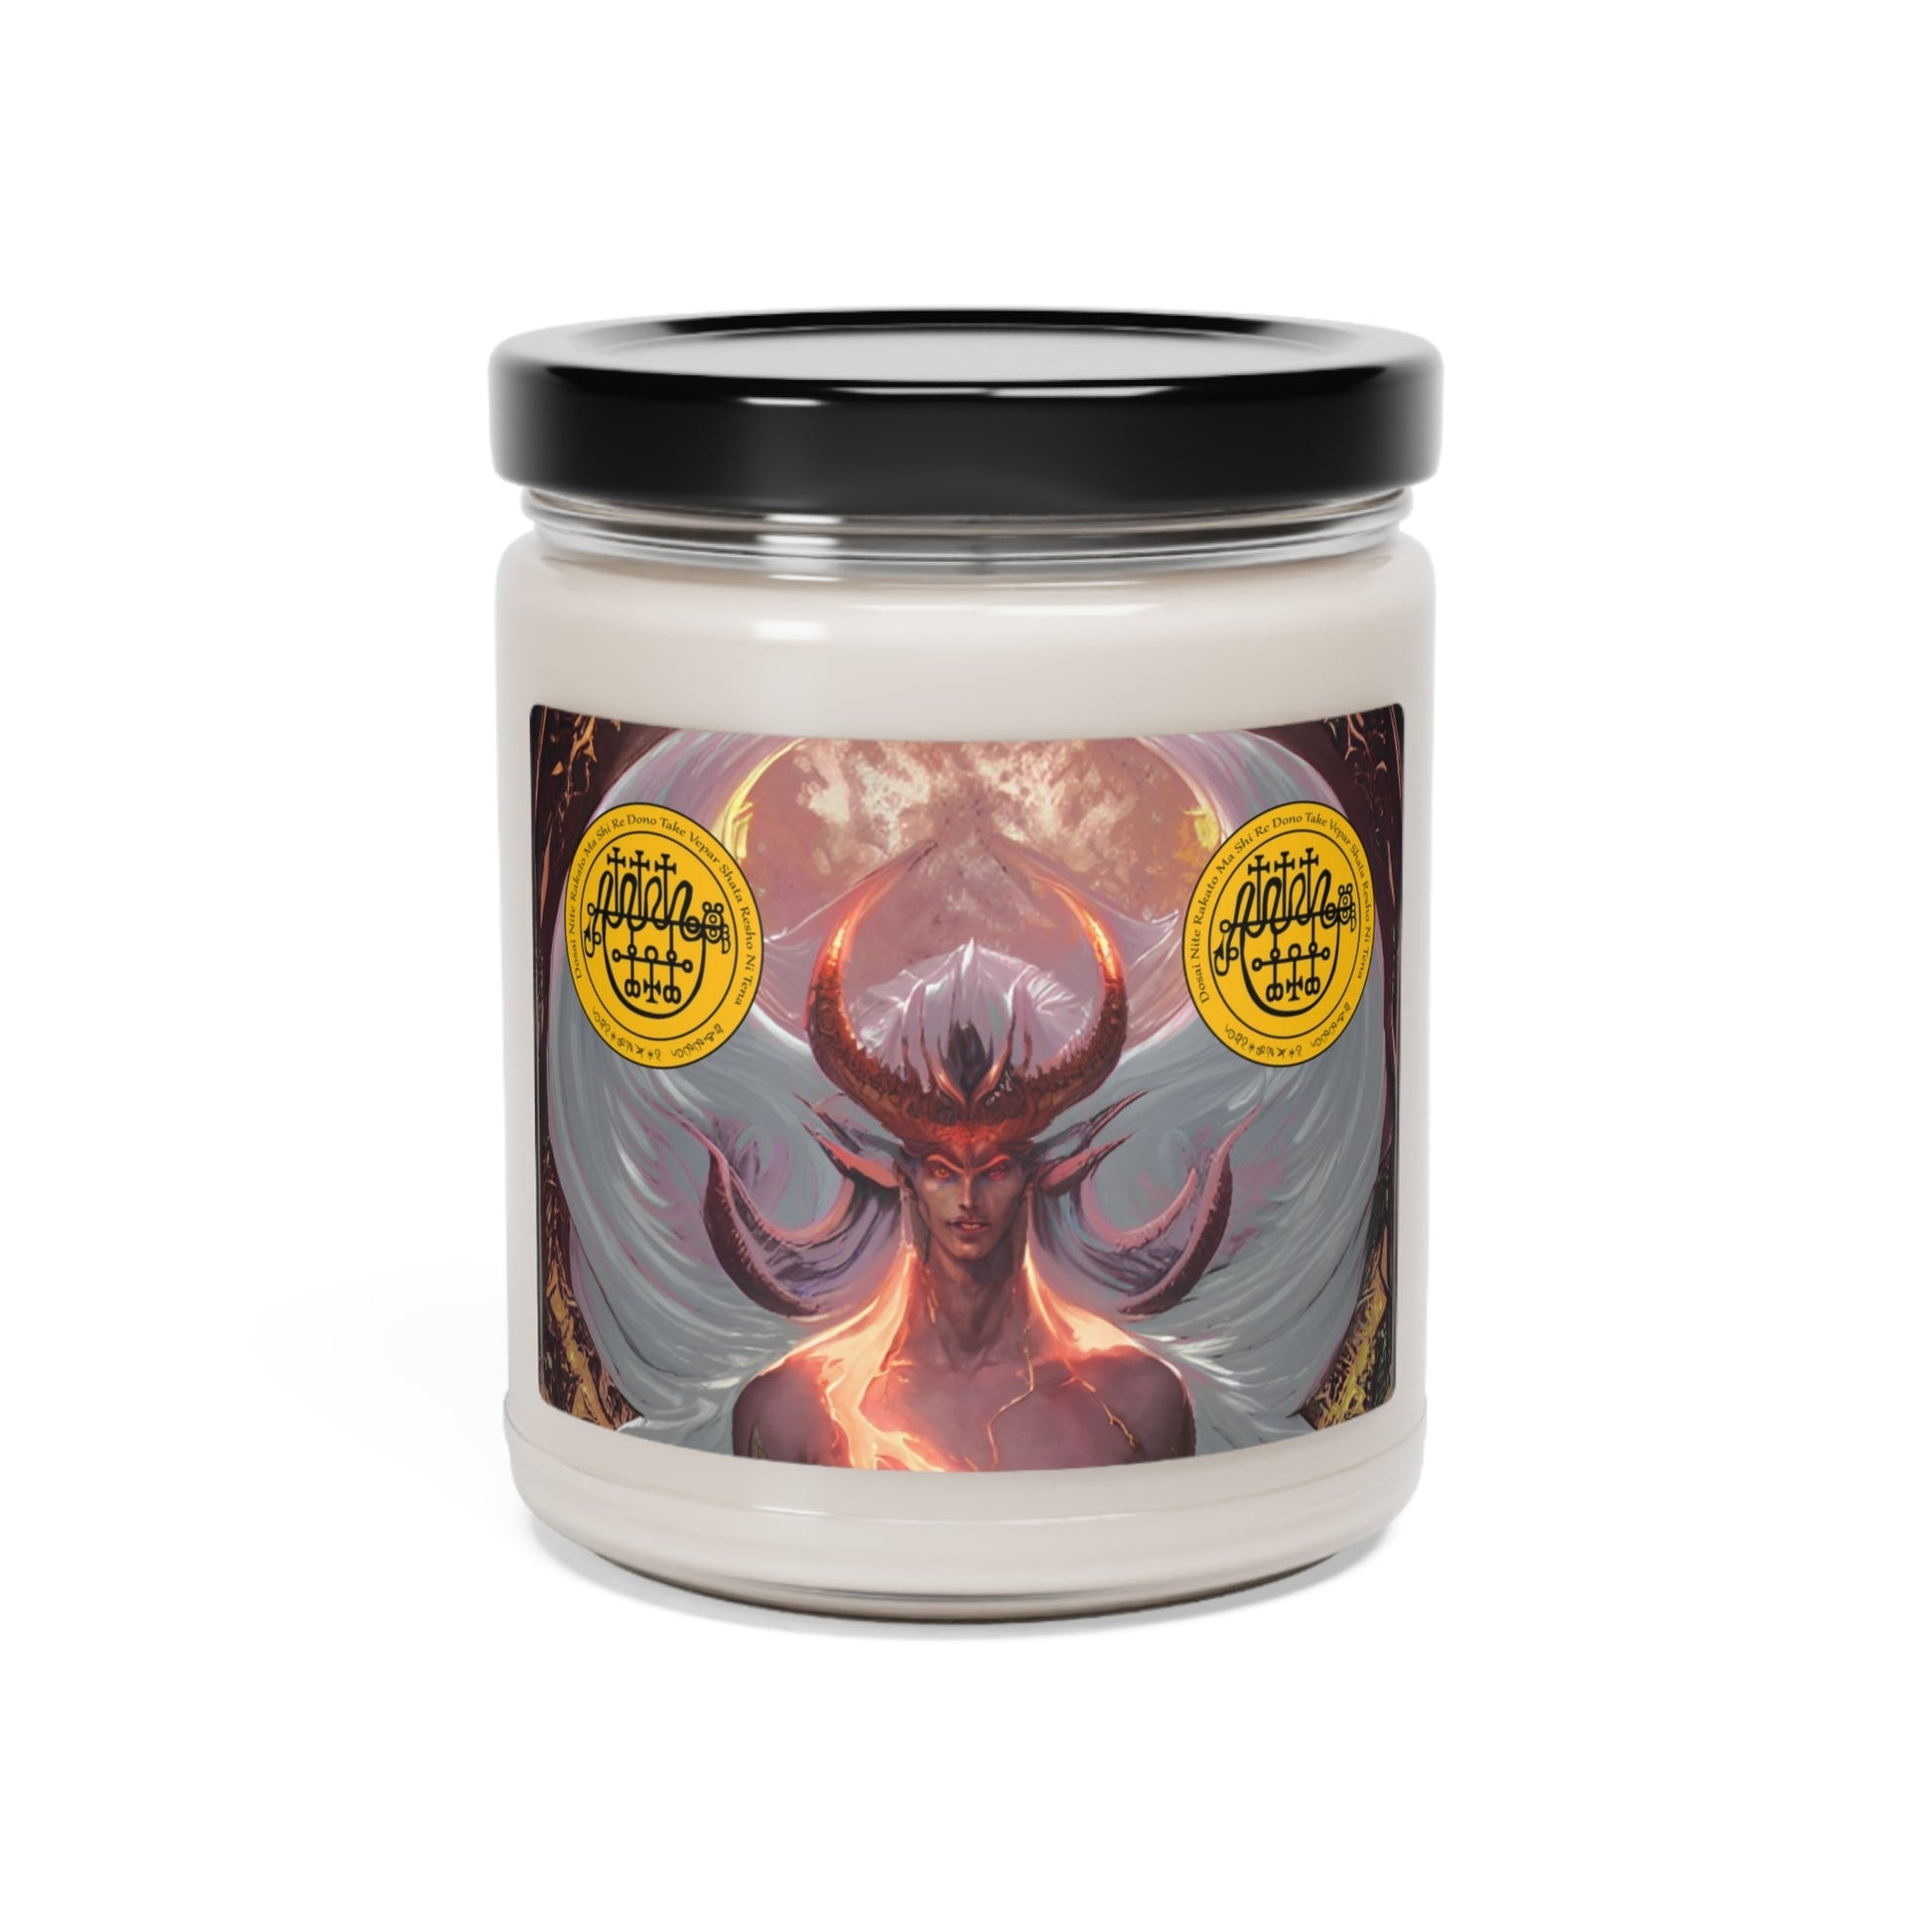 Demon-Vepar-Altar-Scented-Soy-Candle-for-offerings-rituals-initiations-or-praying-and-meditation-16